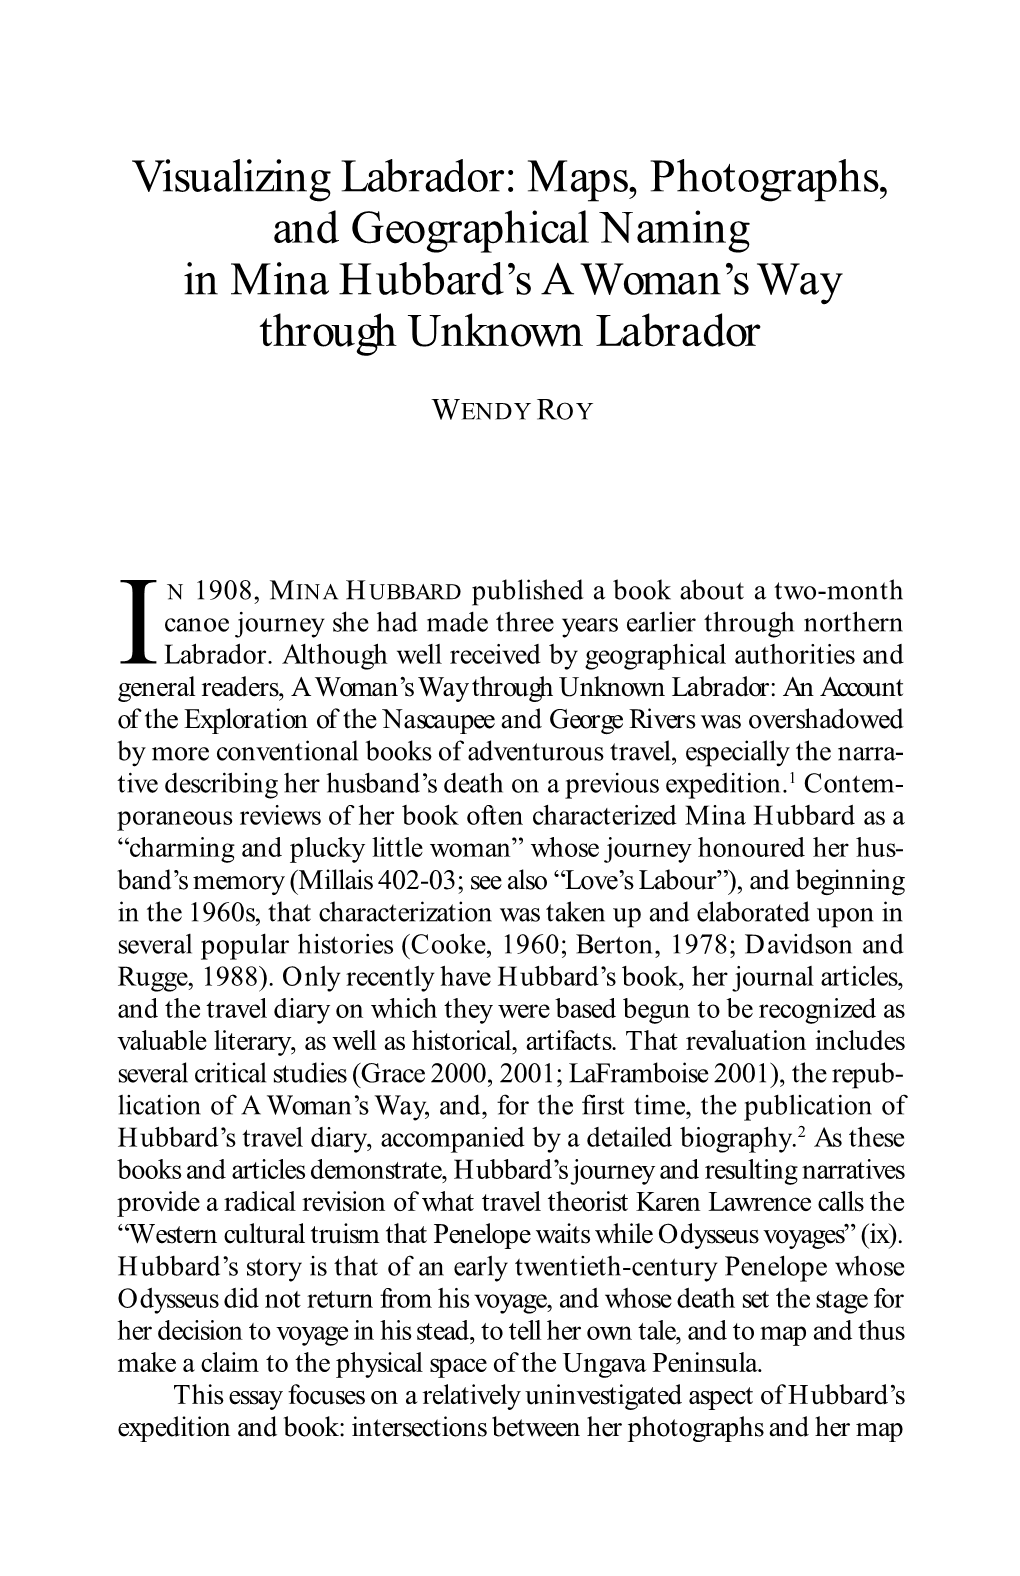 Maps, Photographs, and Geographical Naming in Mina Hubbard’S a Woman’S Way Through Unknown Labrador